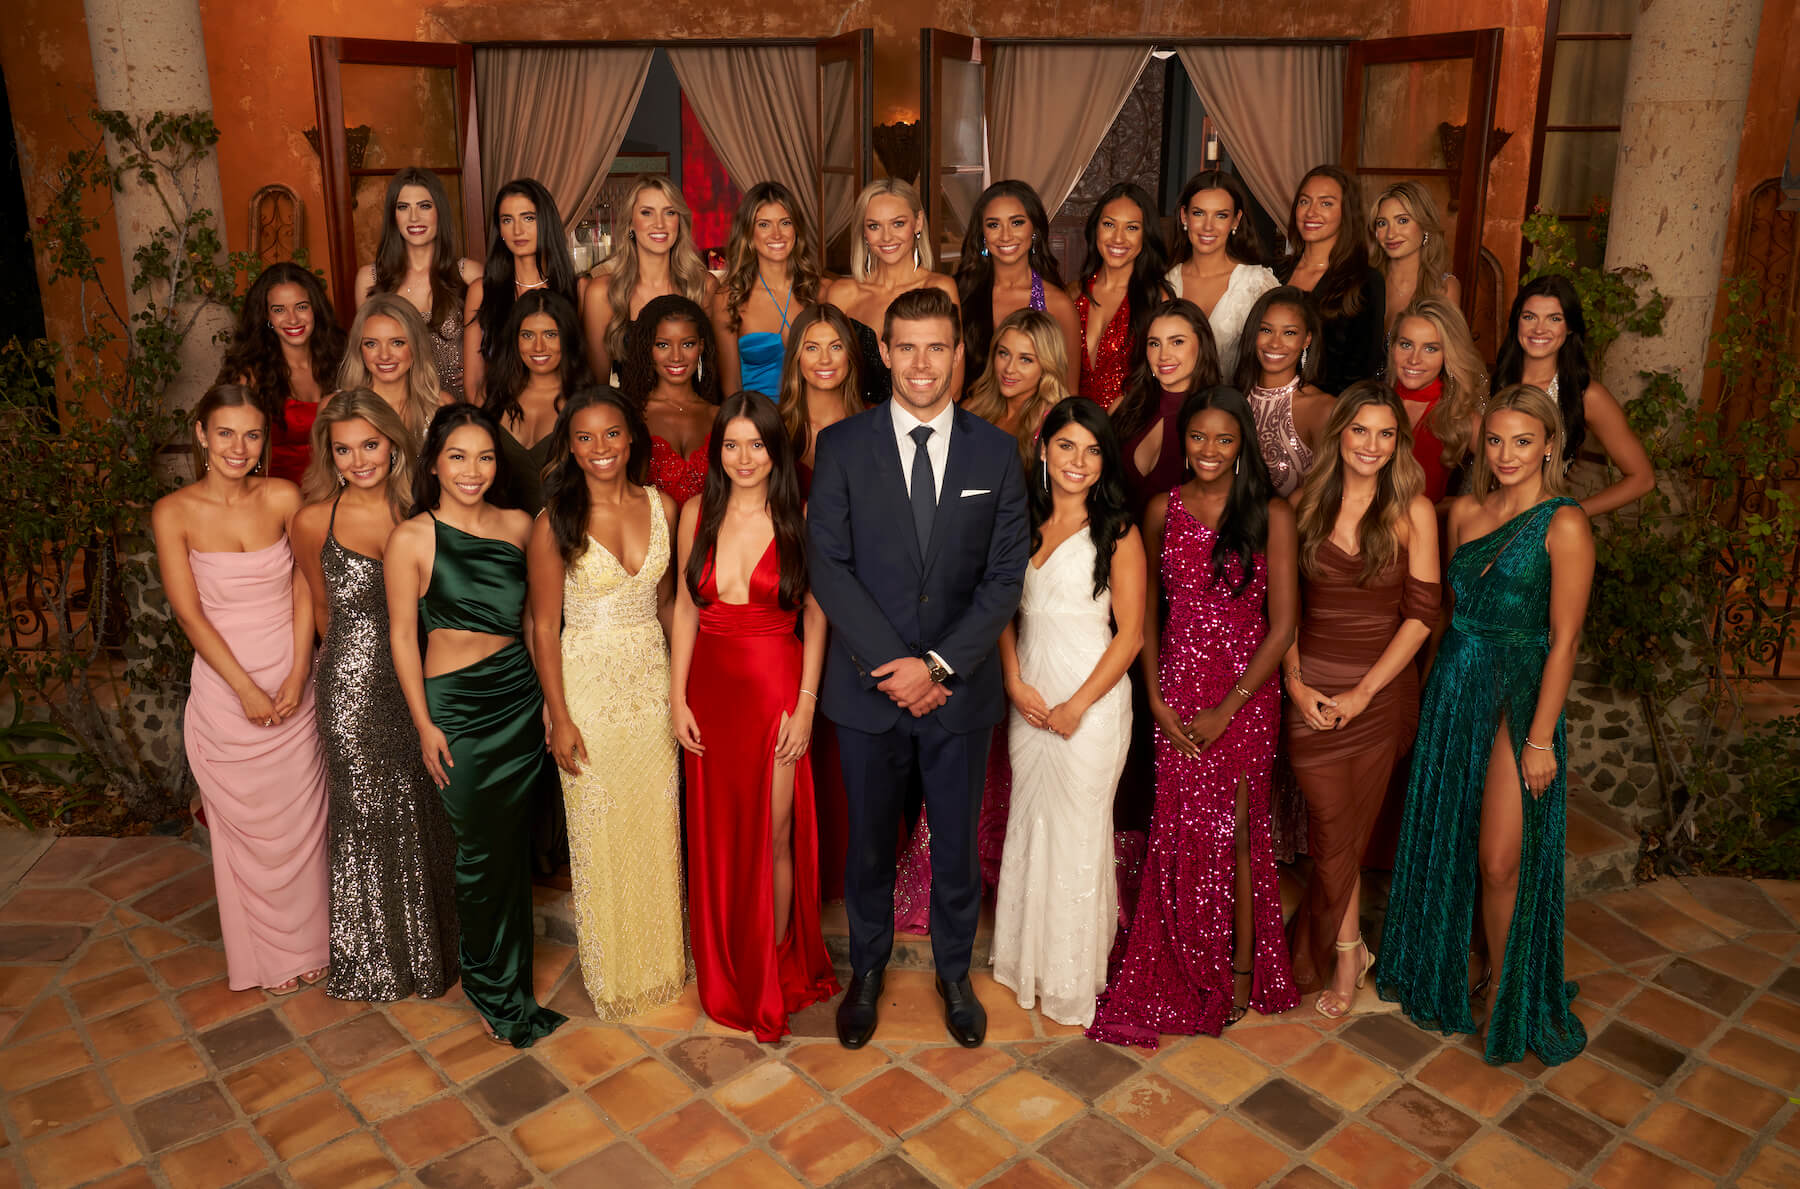 'Bachelor in Paradise' Season 9 Cast Most of the Women Come from Zach